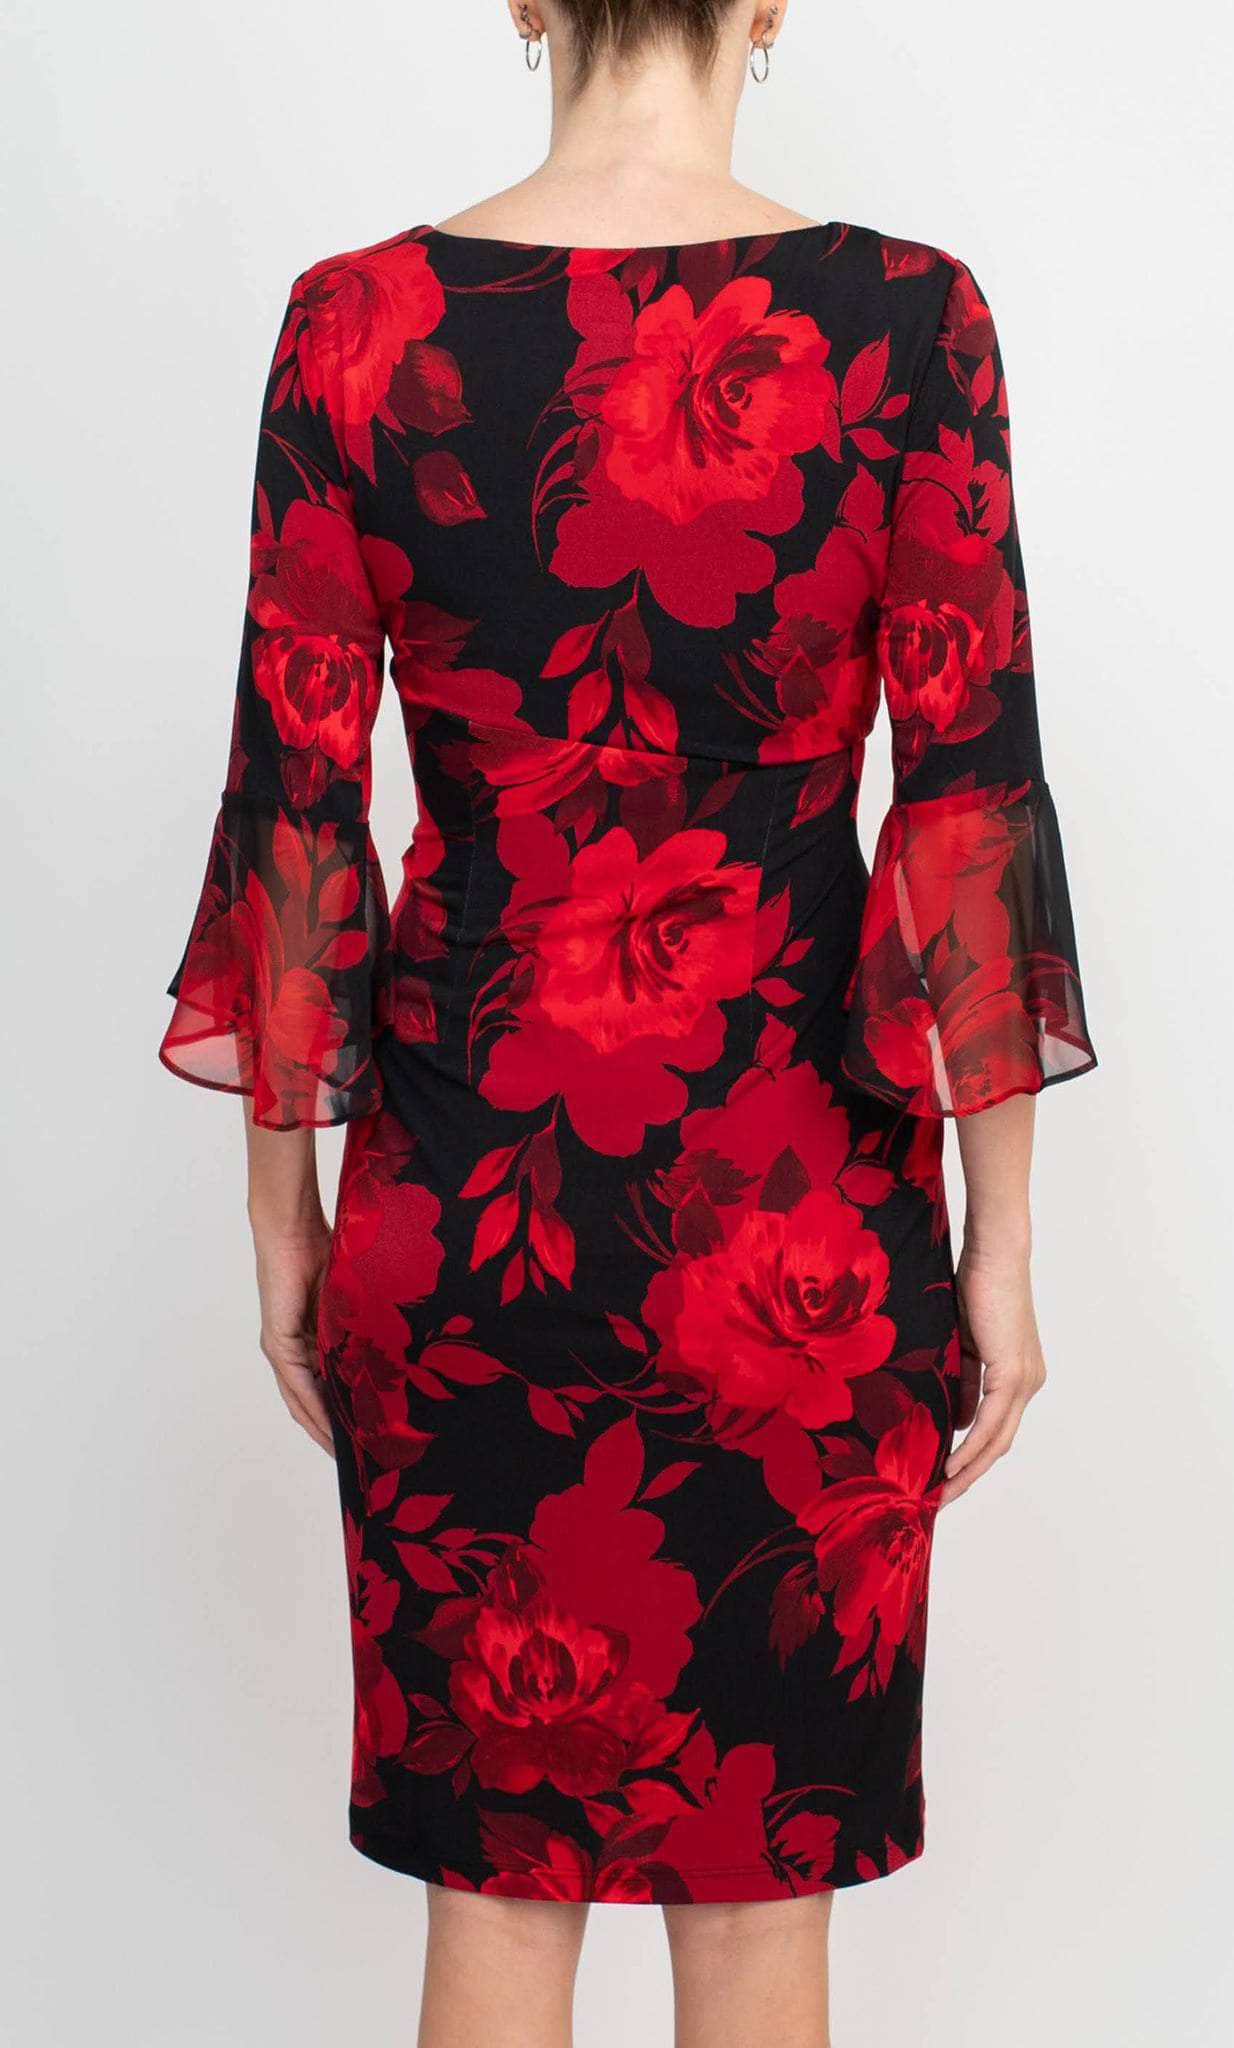 Connected Apparel TEZ57985 - Floral Printed Midi Sheath Dress Special Occasion Dress